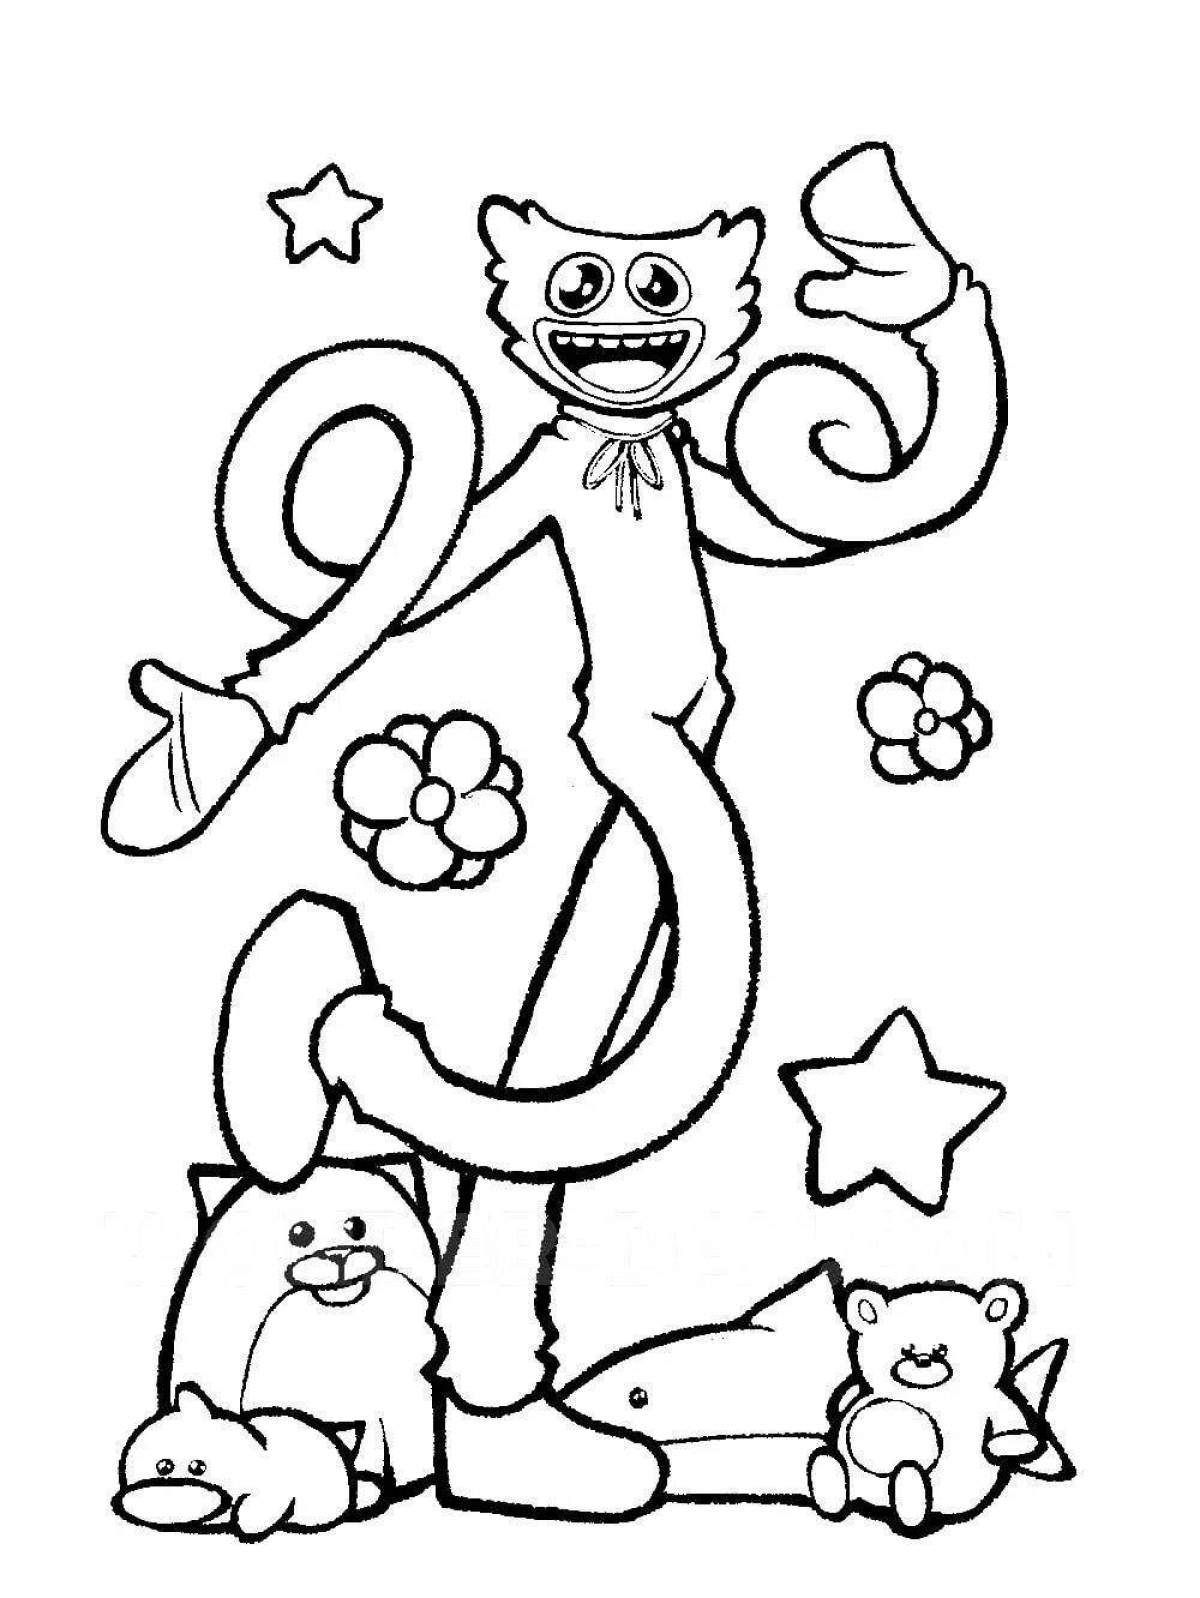 Funny huggy waggi and kisi misi coloring book